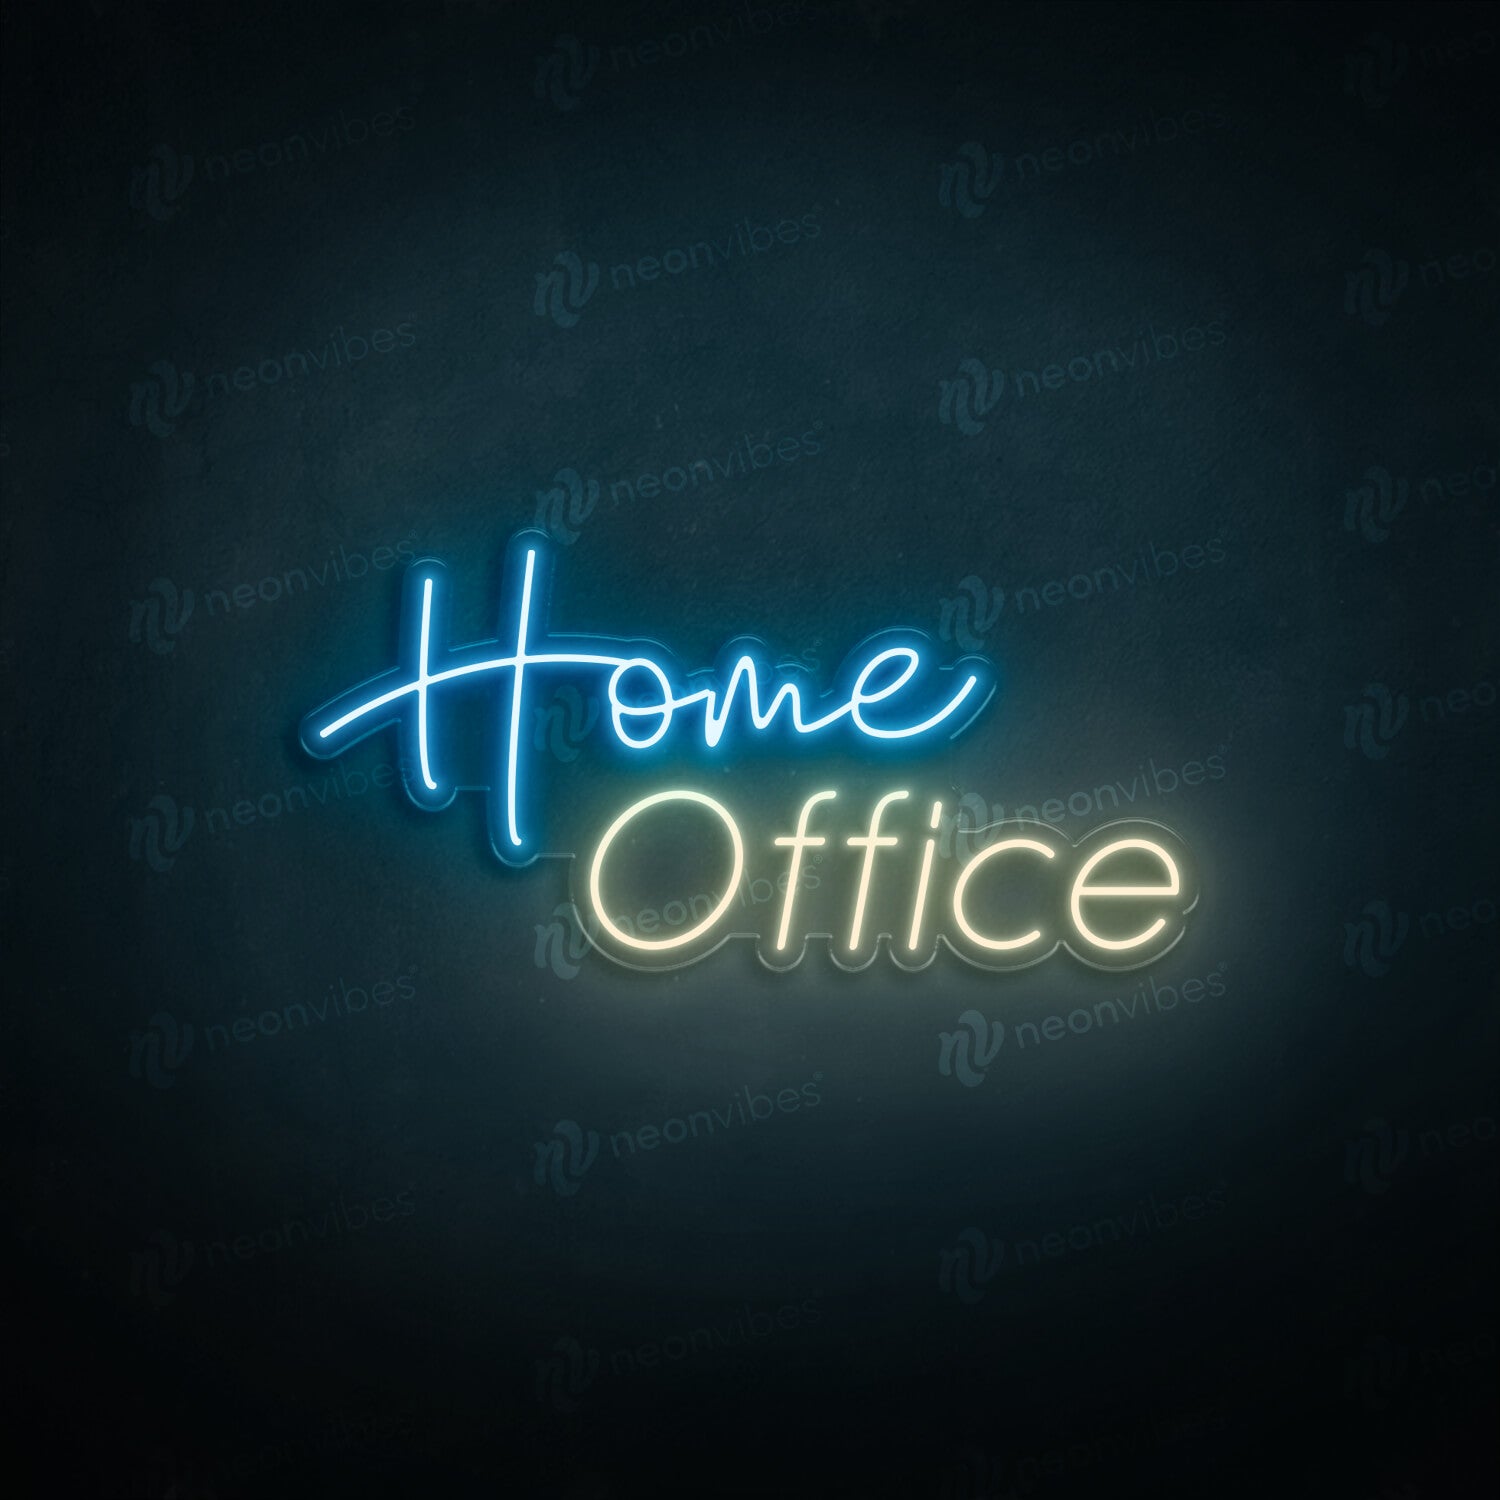 Home office neon sign